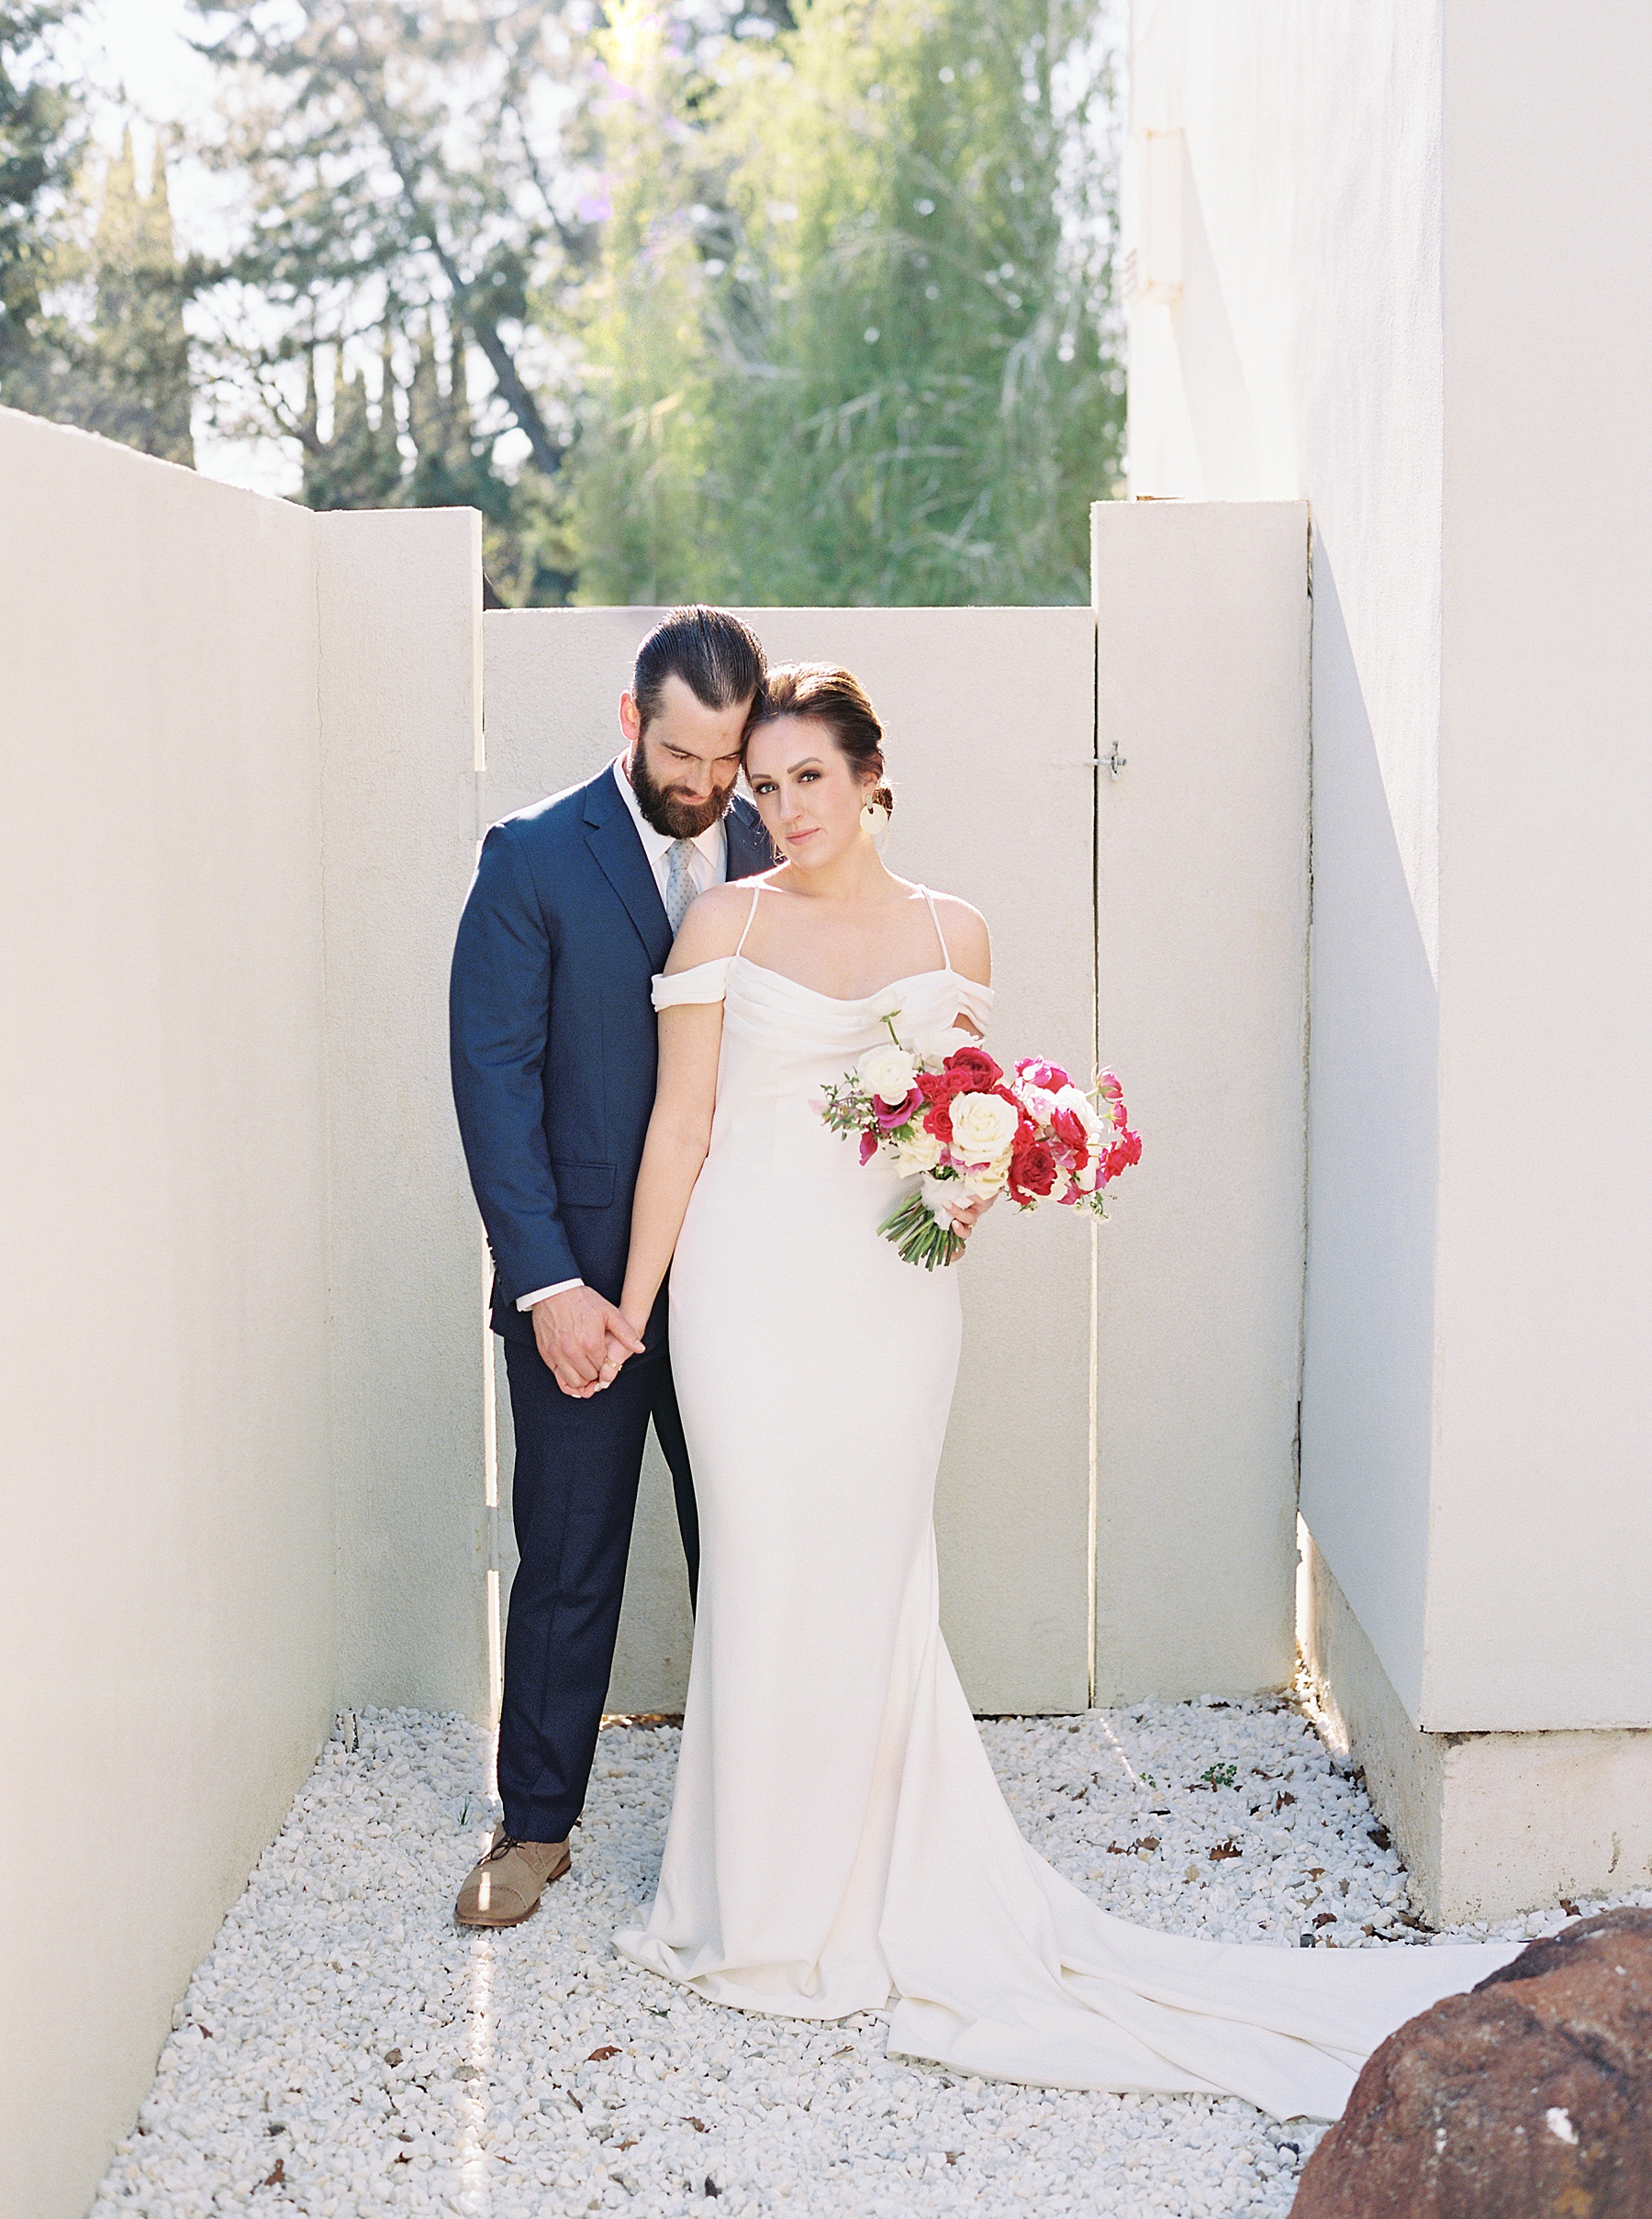 Grecian Inspired Micro-Wedding with Events by Kristina Elyse - Ash Baumgartner - Inspired by This - Sonoma Wedding Photographer_0032.jpg